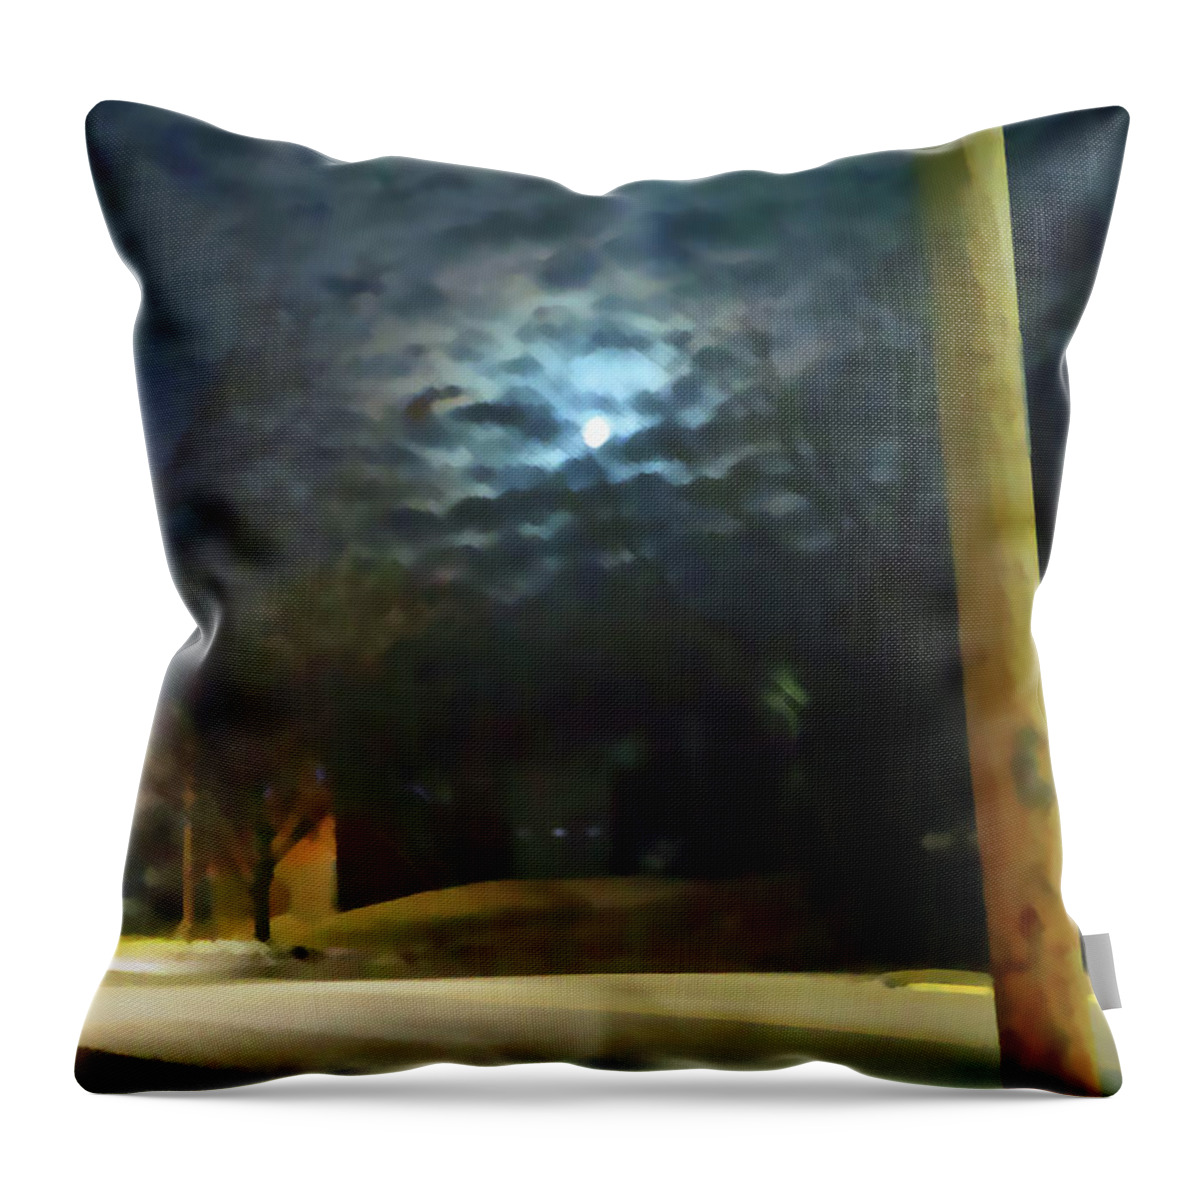 Lawrence Throw Pillow featuring the photograph Kansas Moon3989 by Carolyn Stagger Cokley